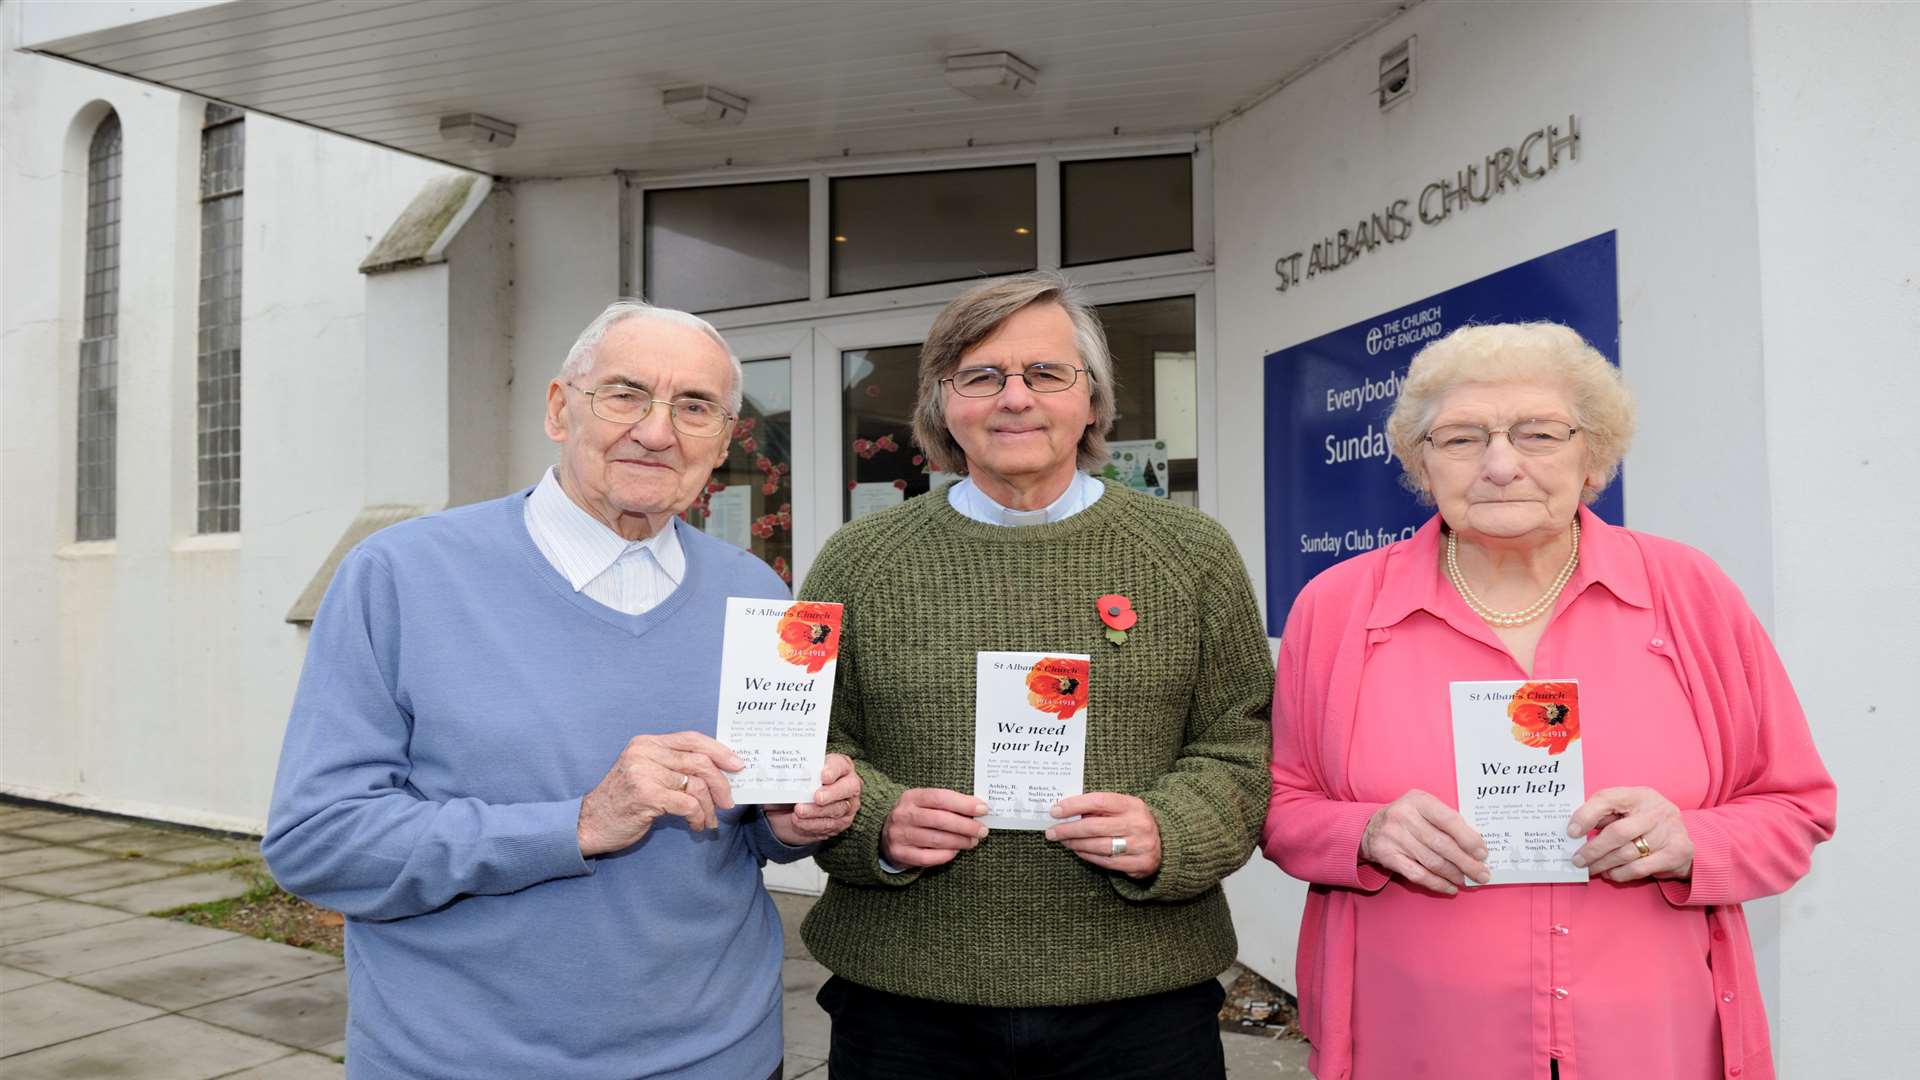 Denis Rayment, Rev David Helms and Patricia Rayment